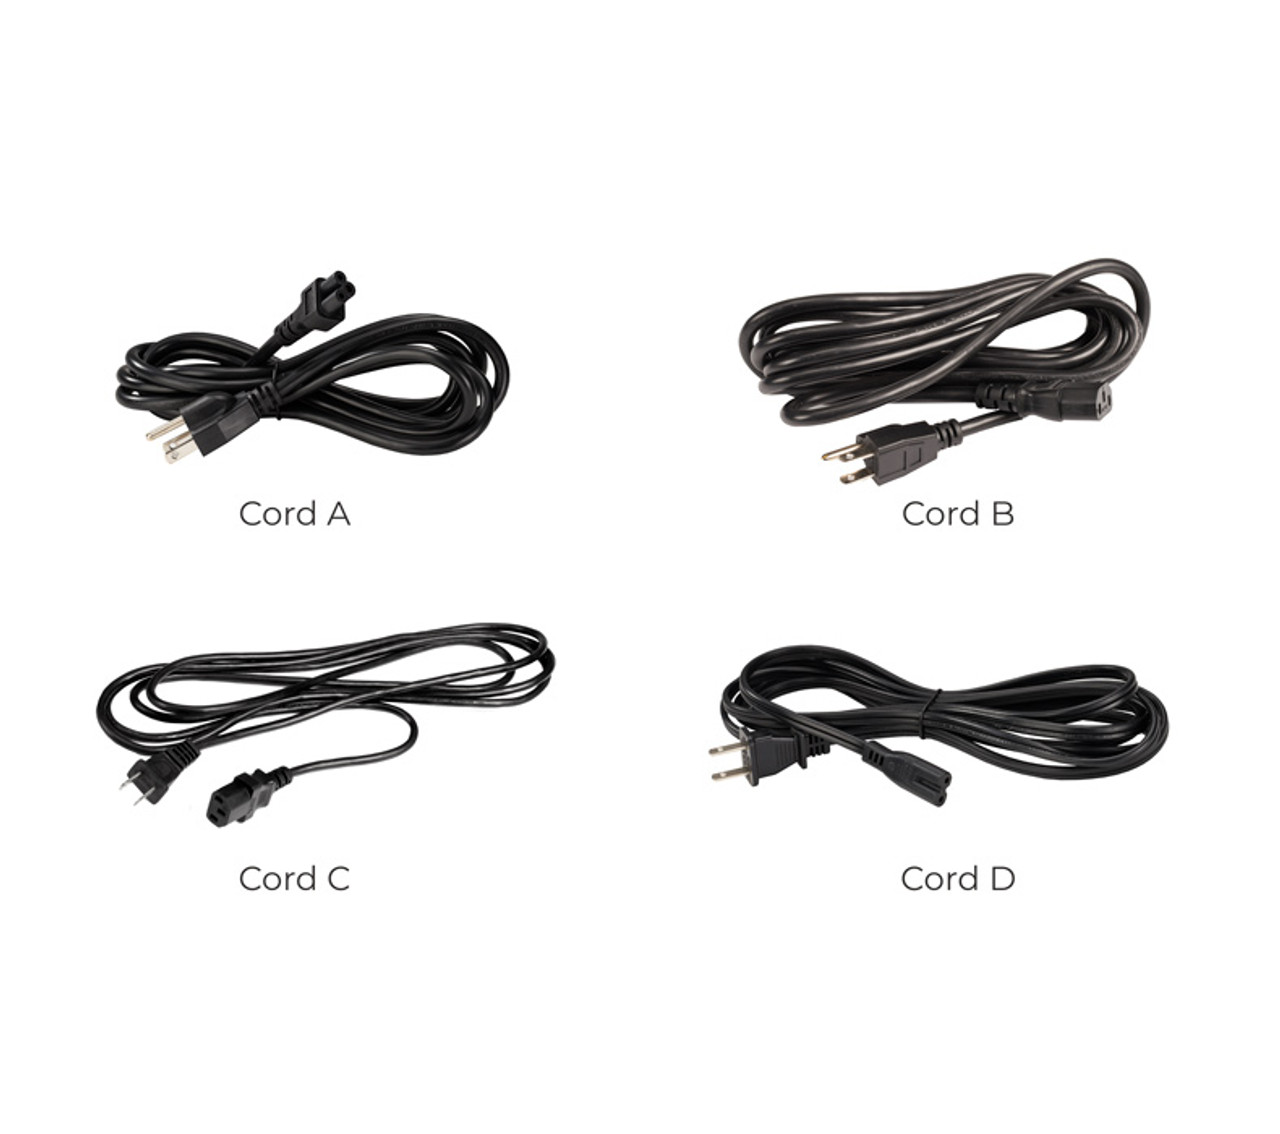 Insignia - 10' 3-Outlet Extension Power Cord - Black